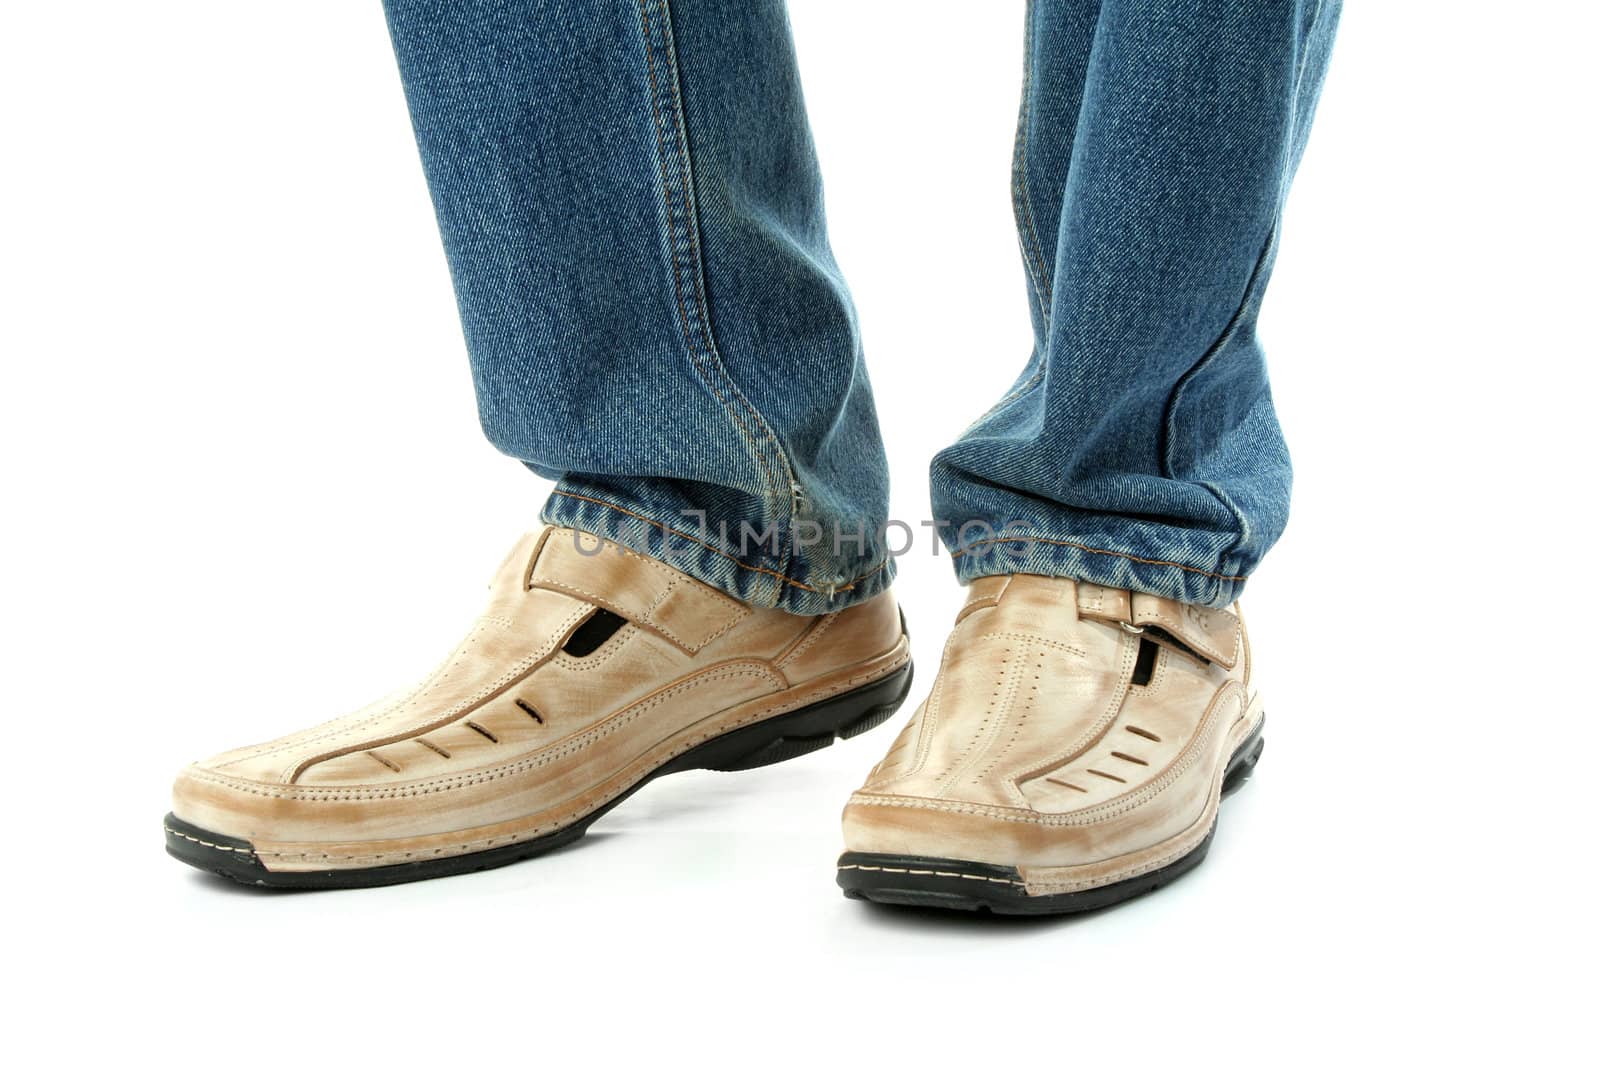 Human foots with brown leather shoes and jeans, isolated on white